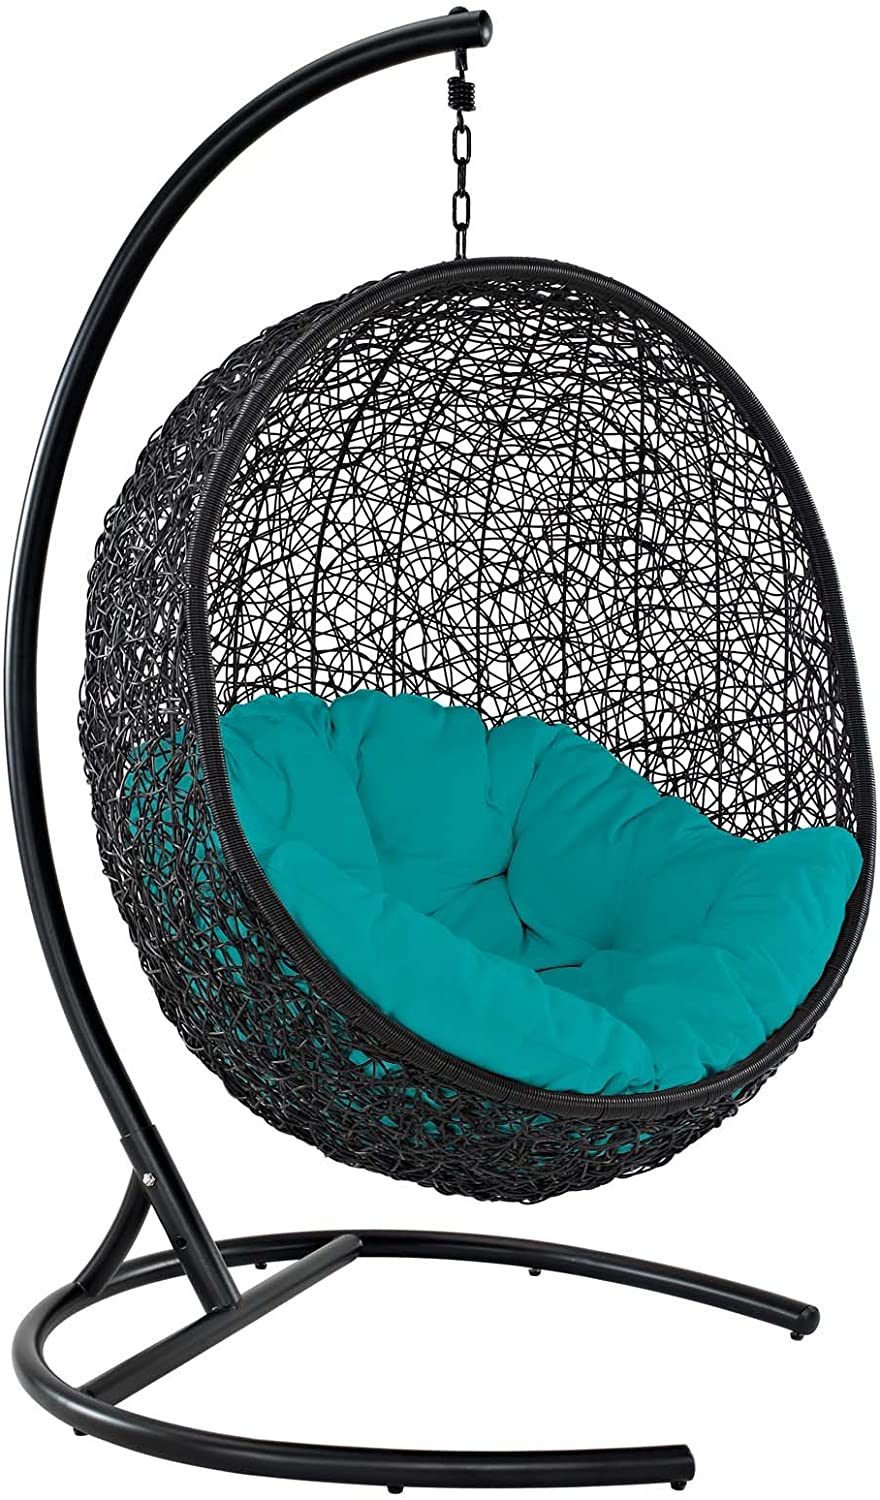 The Best Egg Chair October 2021, Are Egg Chairs Waterproof